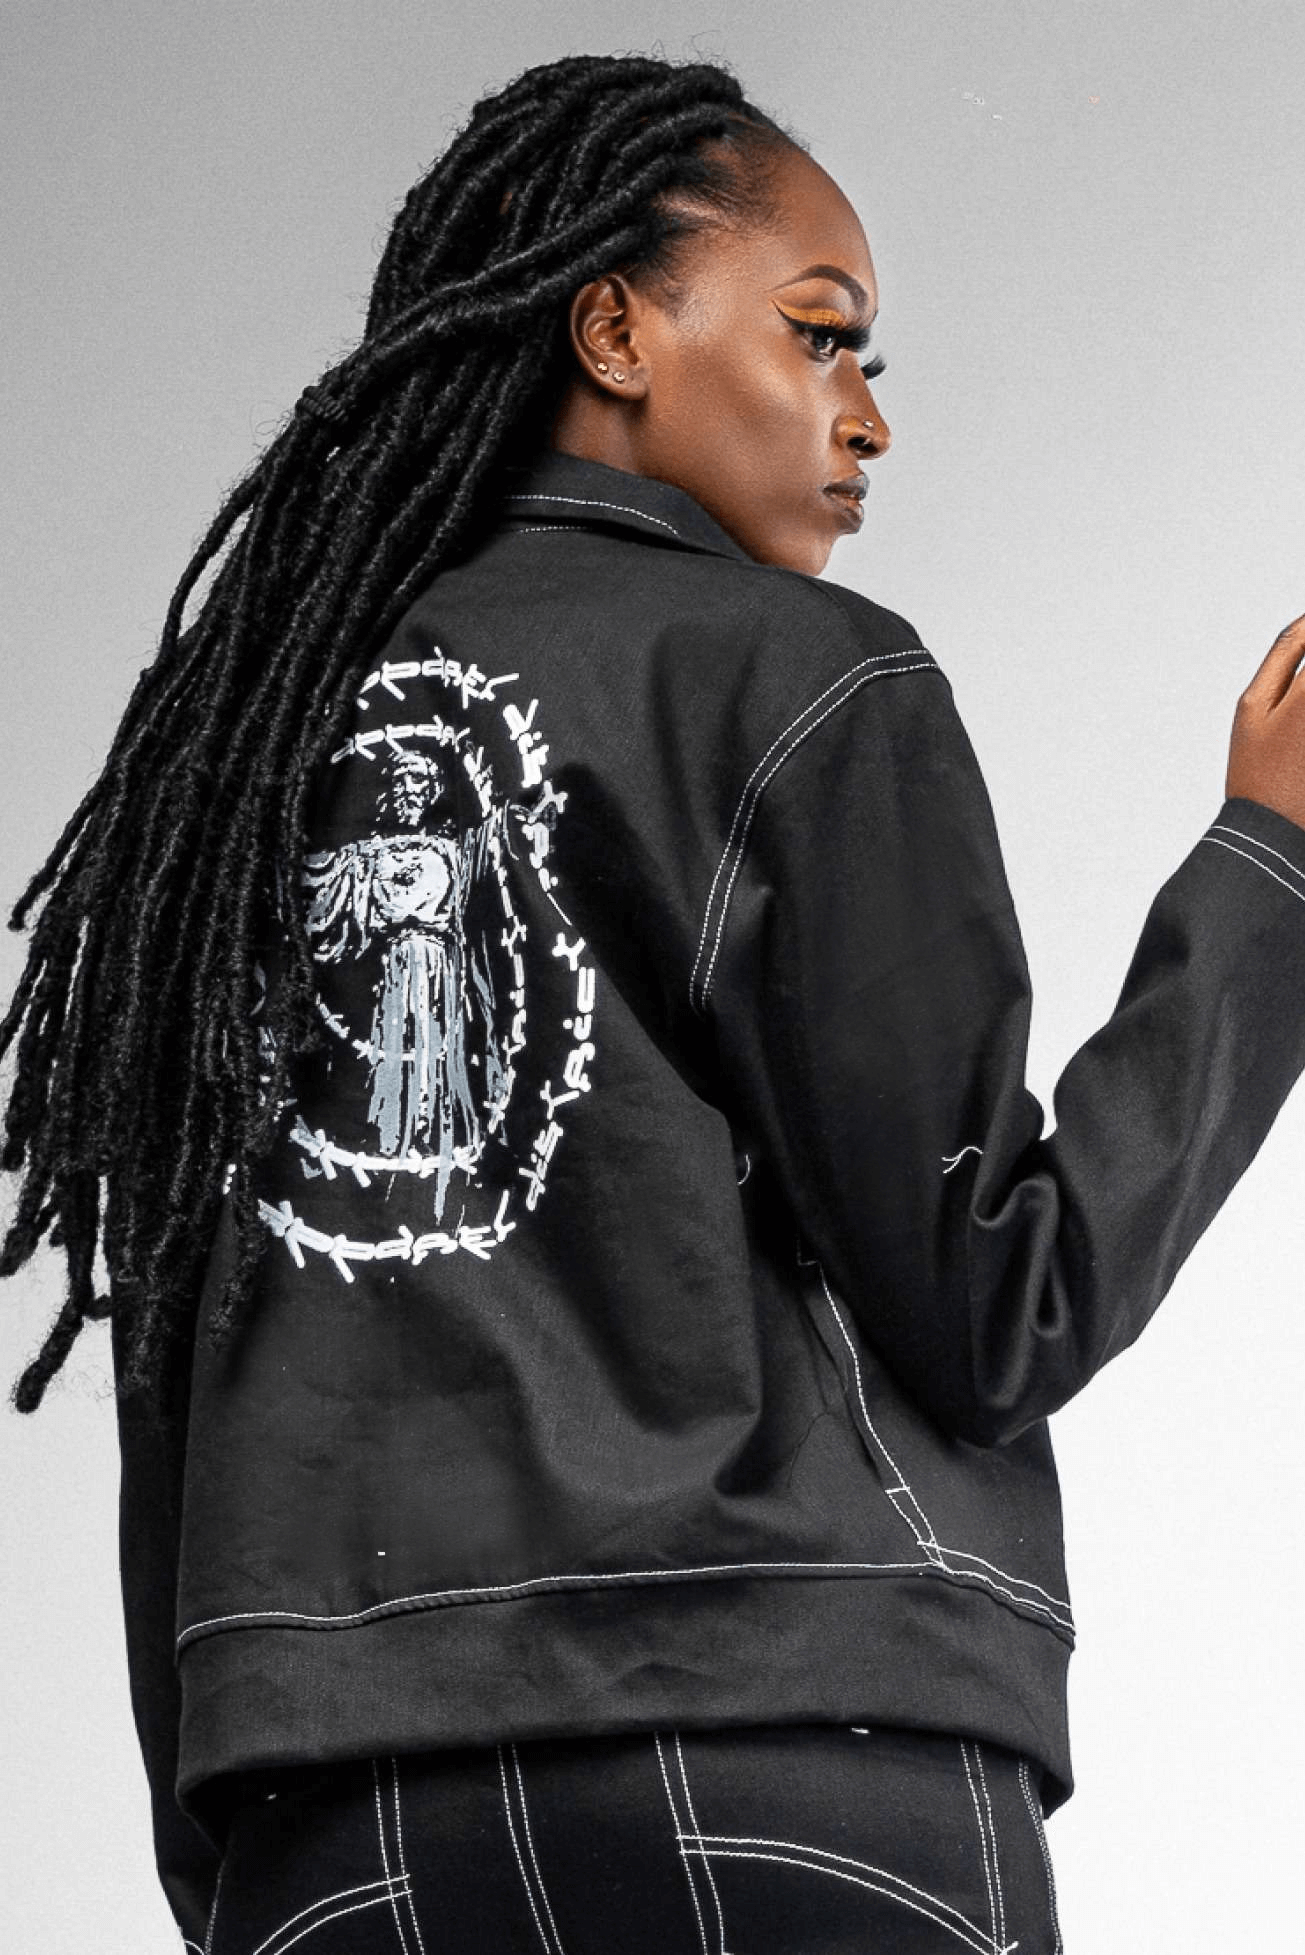 Shop JC Full Circle Black Denim Jacket by Nairobi Apparel District on Arrai. Discover stylish, affordable clothing, jewelry, handbags and unique handmade pieces from top Kenyan & African fashion brands prioritising sustainability and quality craftsmanship